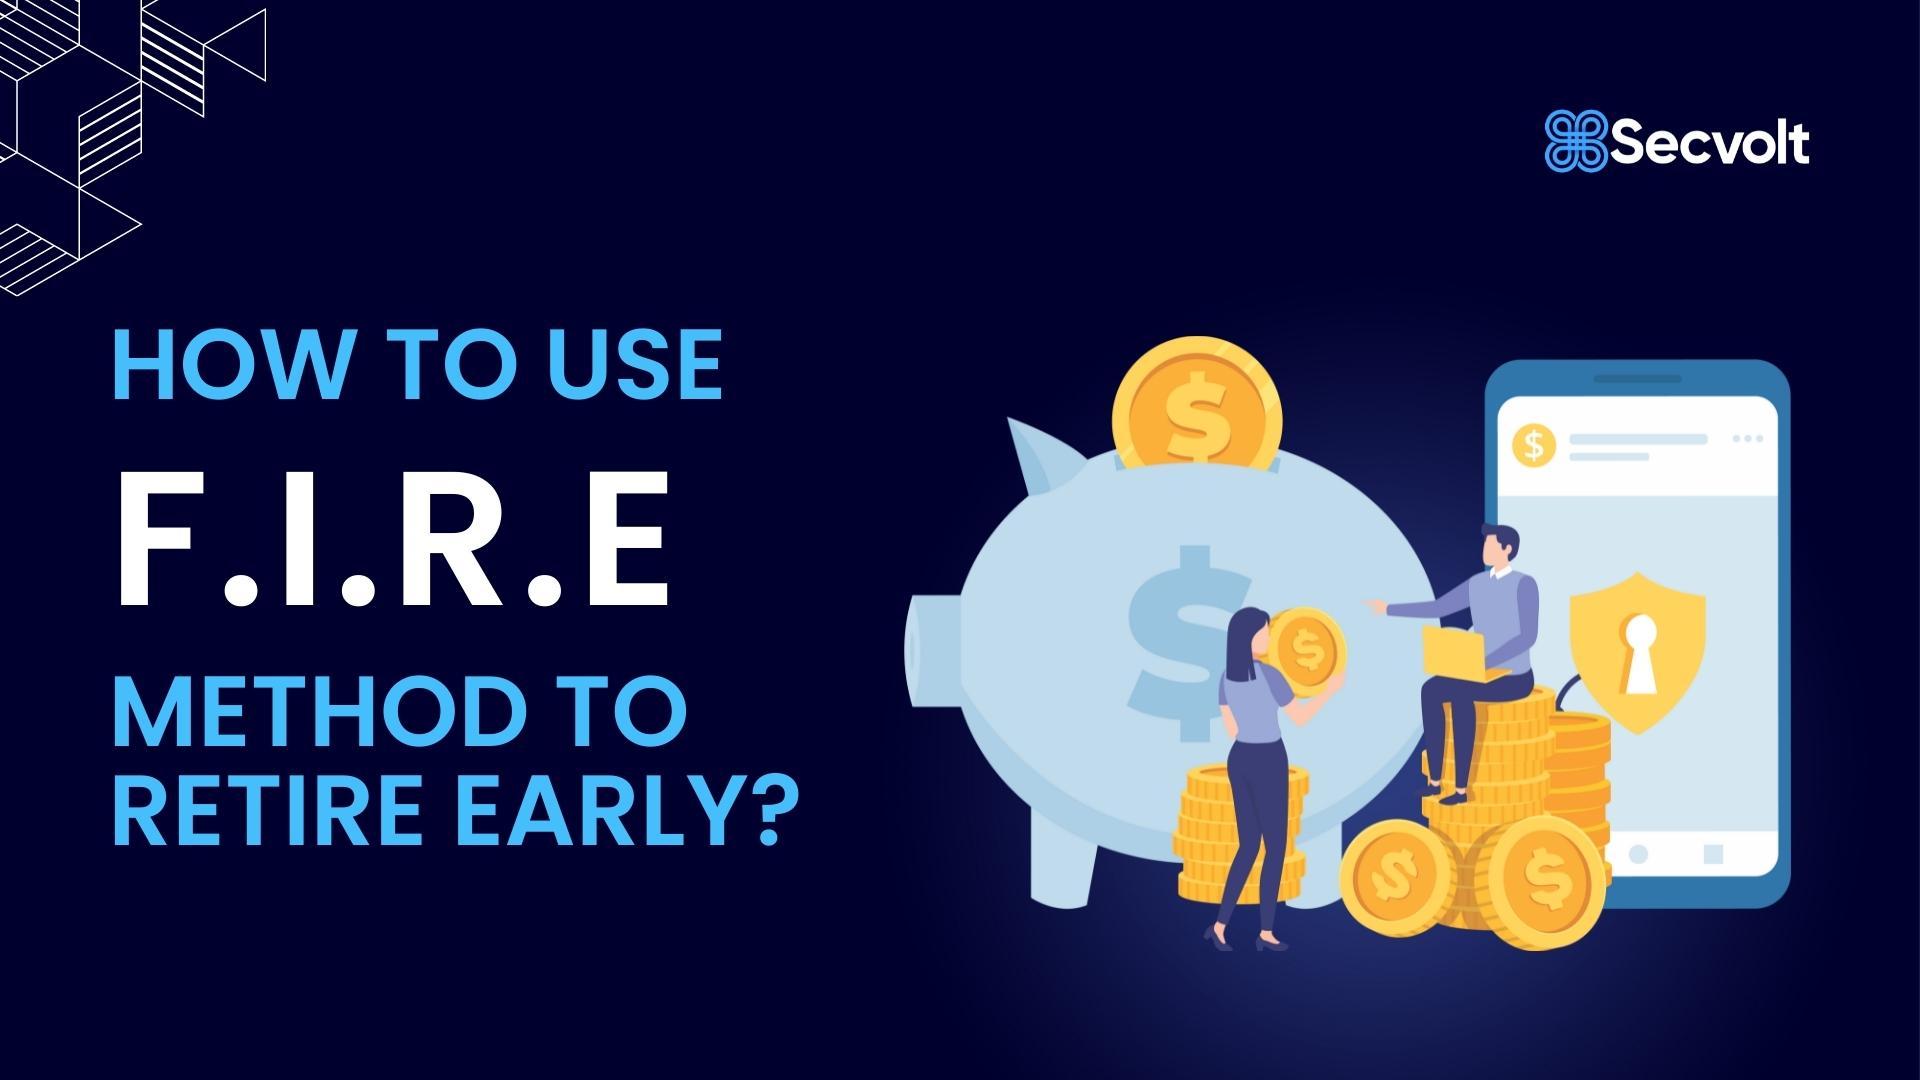 How to use F.I.R.E method to retire early?